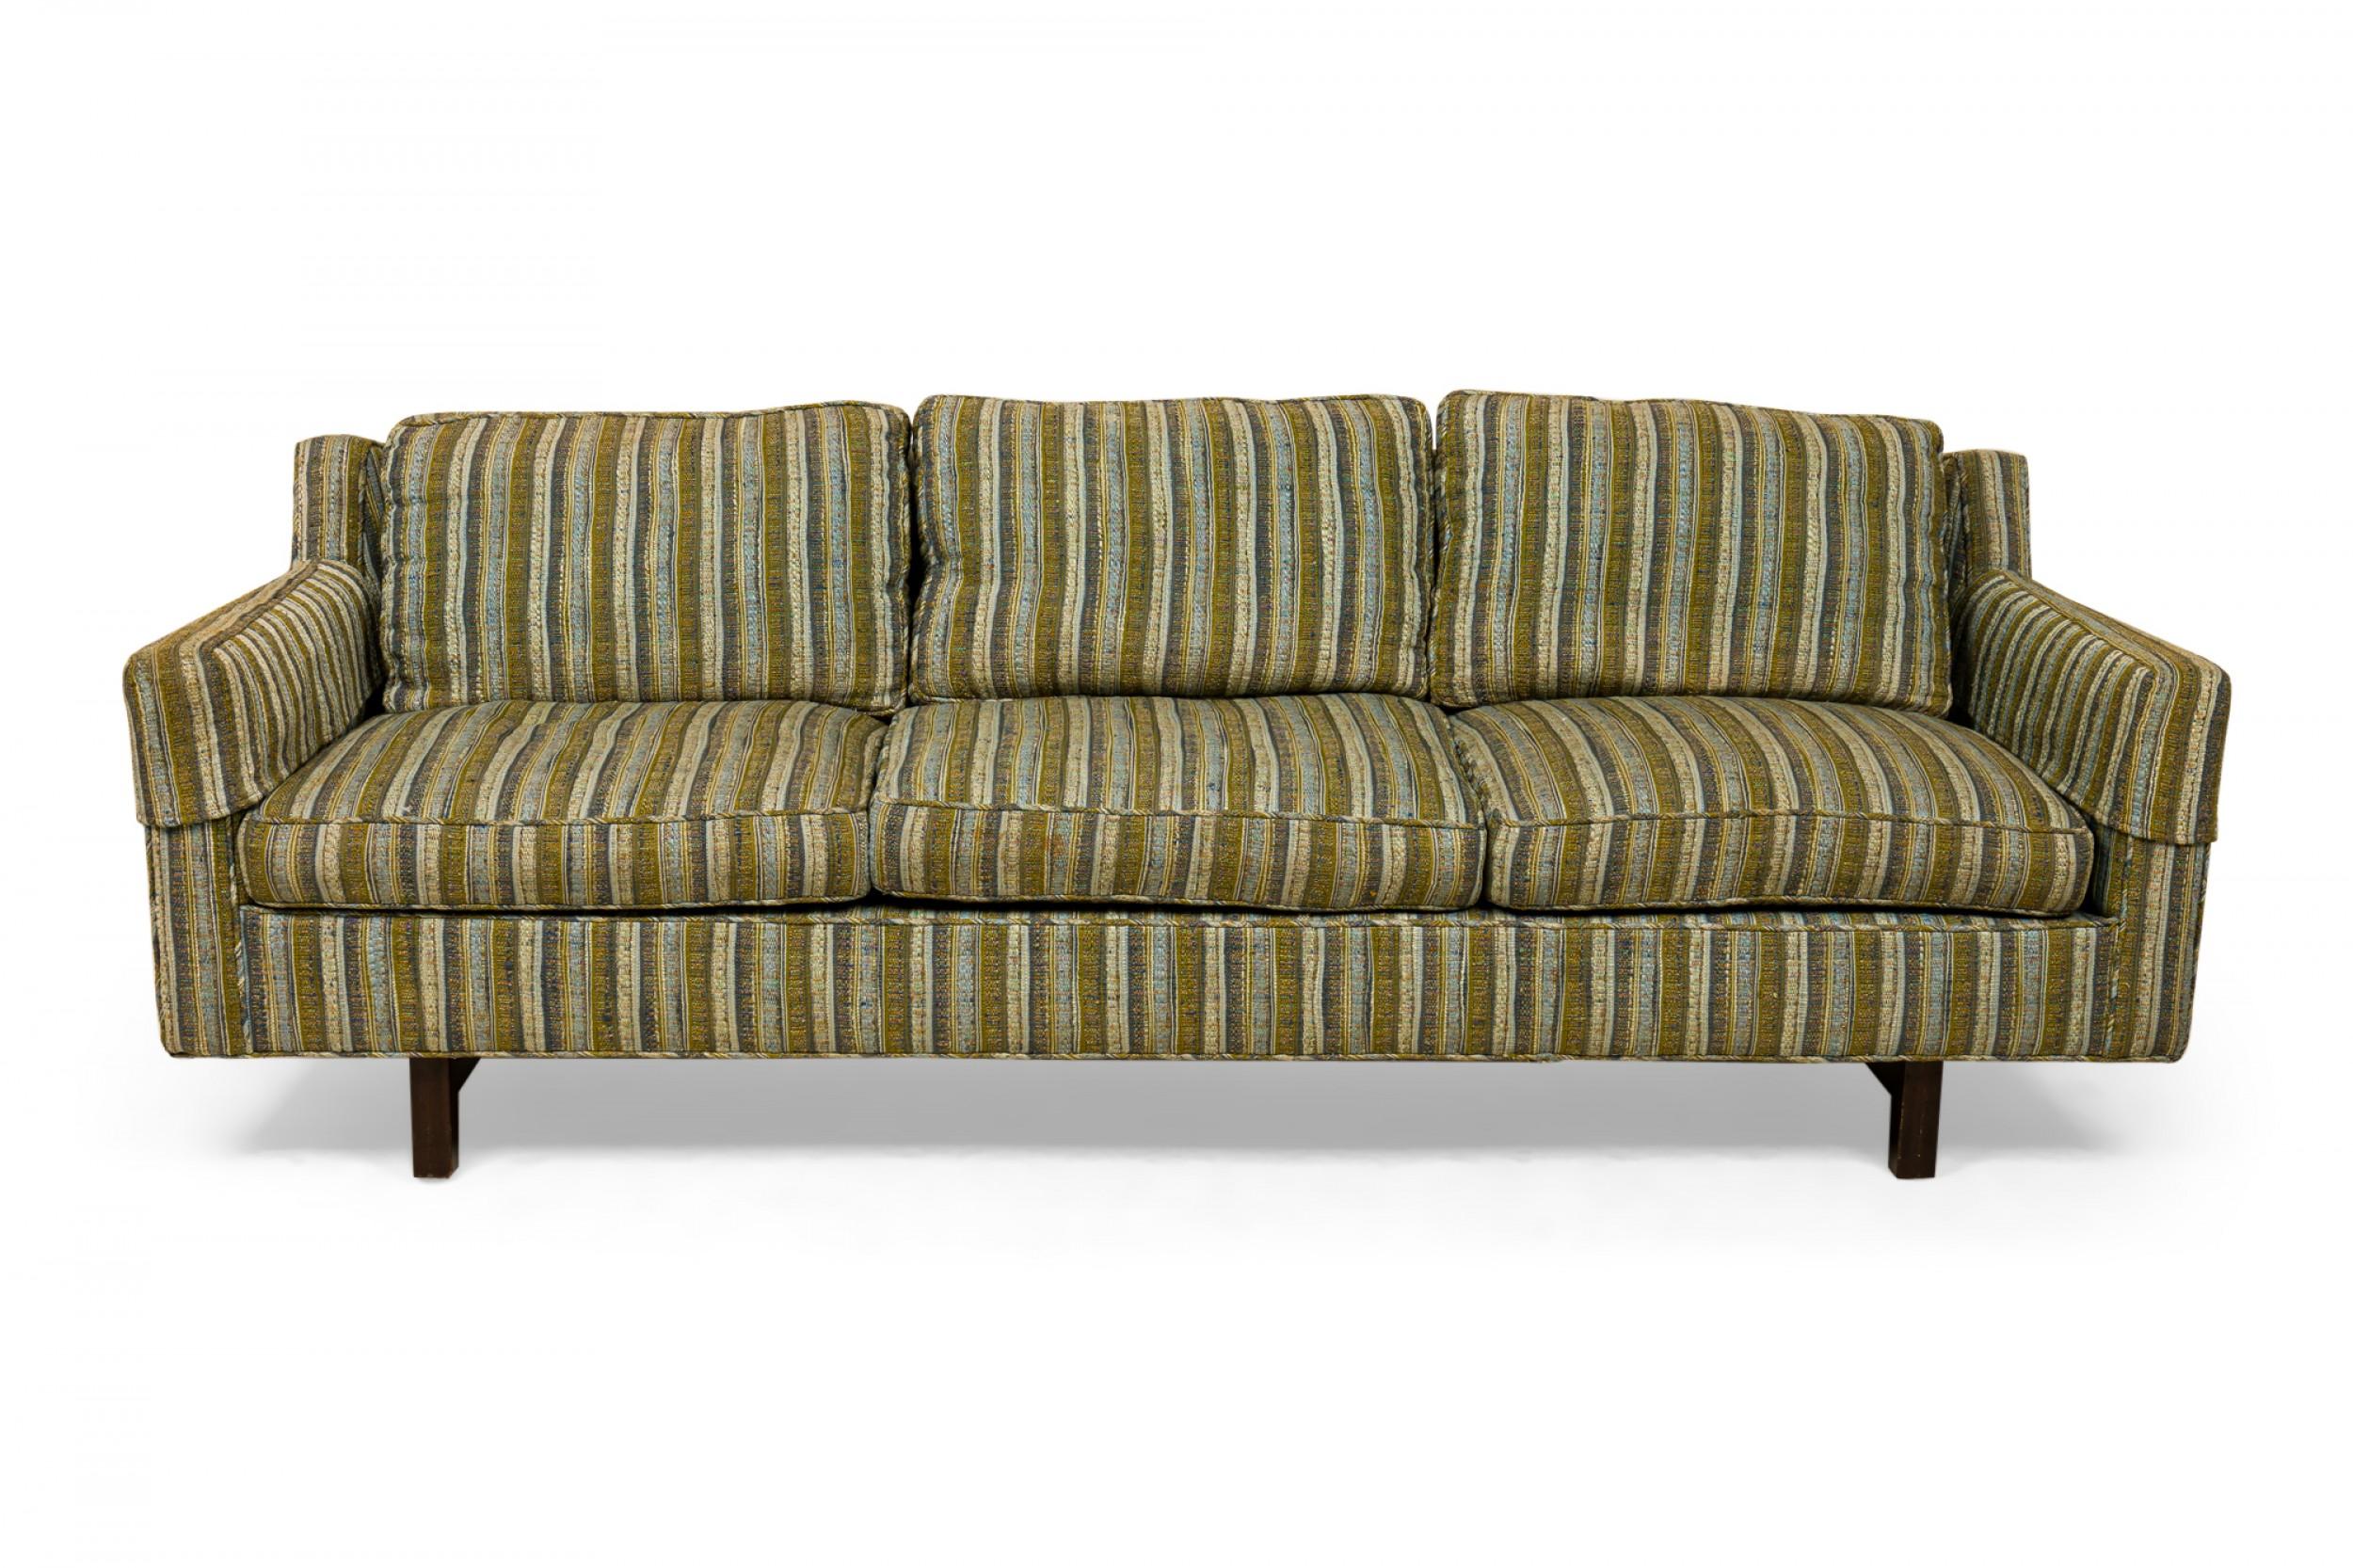 American Mid-Century 3-seat sofa with beige, light green, and brown striped upholstery with three back and three seat cushions. (EDWARD WORMLEY FOR DUNBAR FURNITURE COMPANY).
 